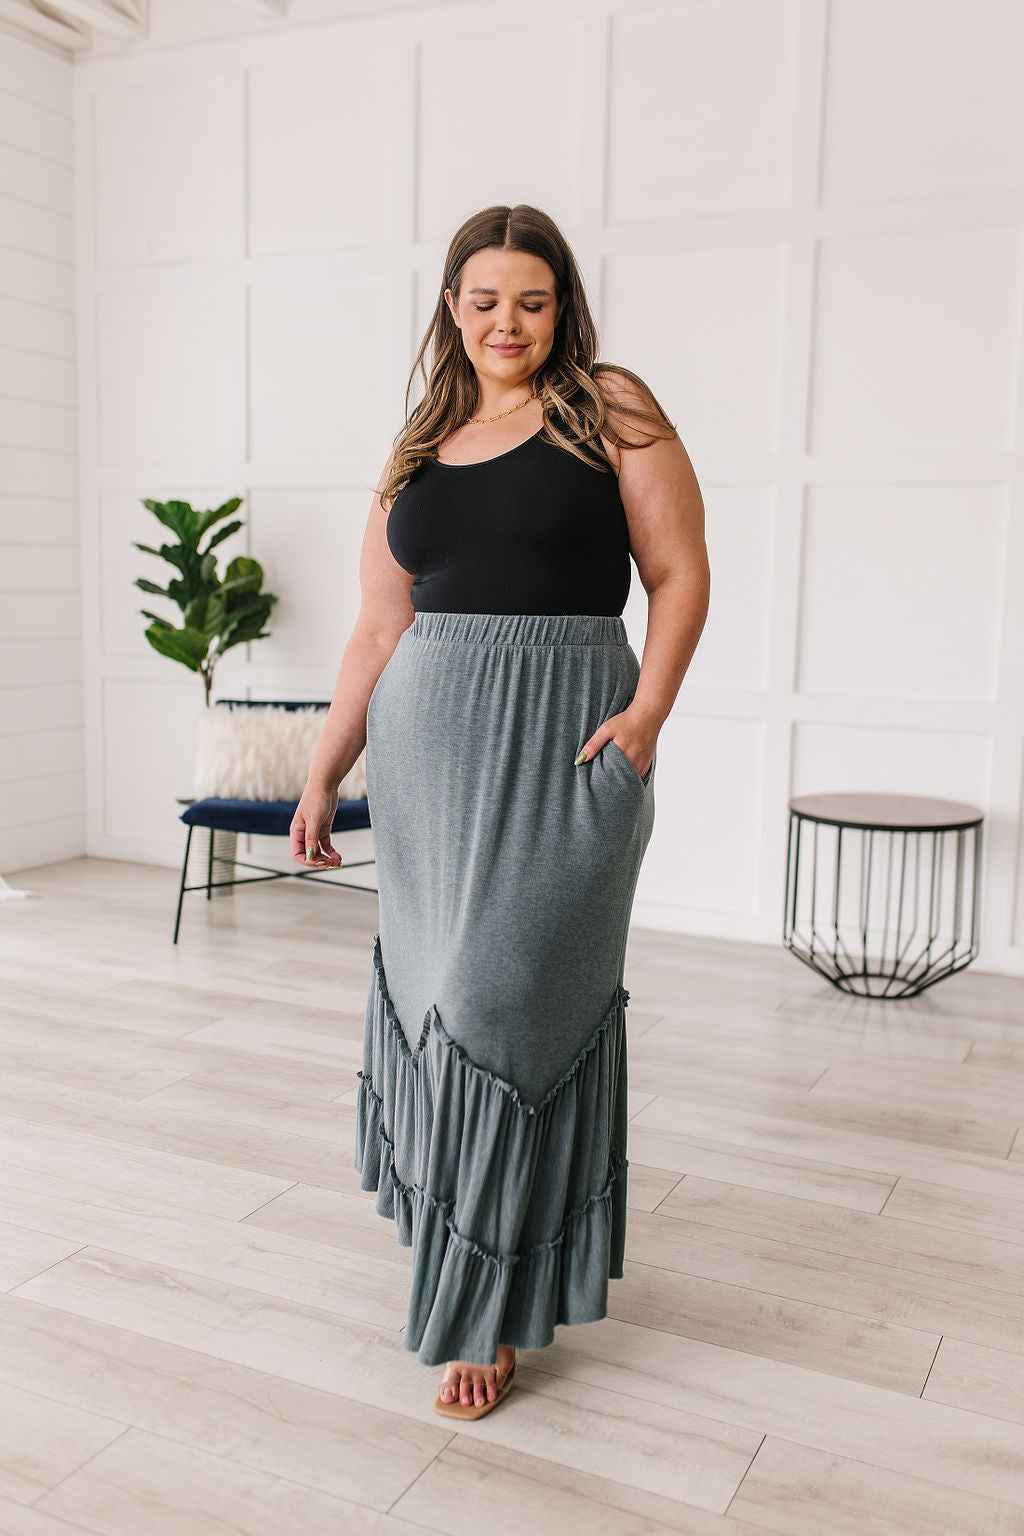 All In Favor Blue Ruffled Bottom Maxi Skirt Womens Southern Soul Collectives 